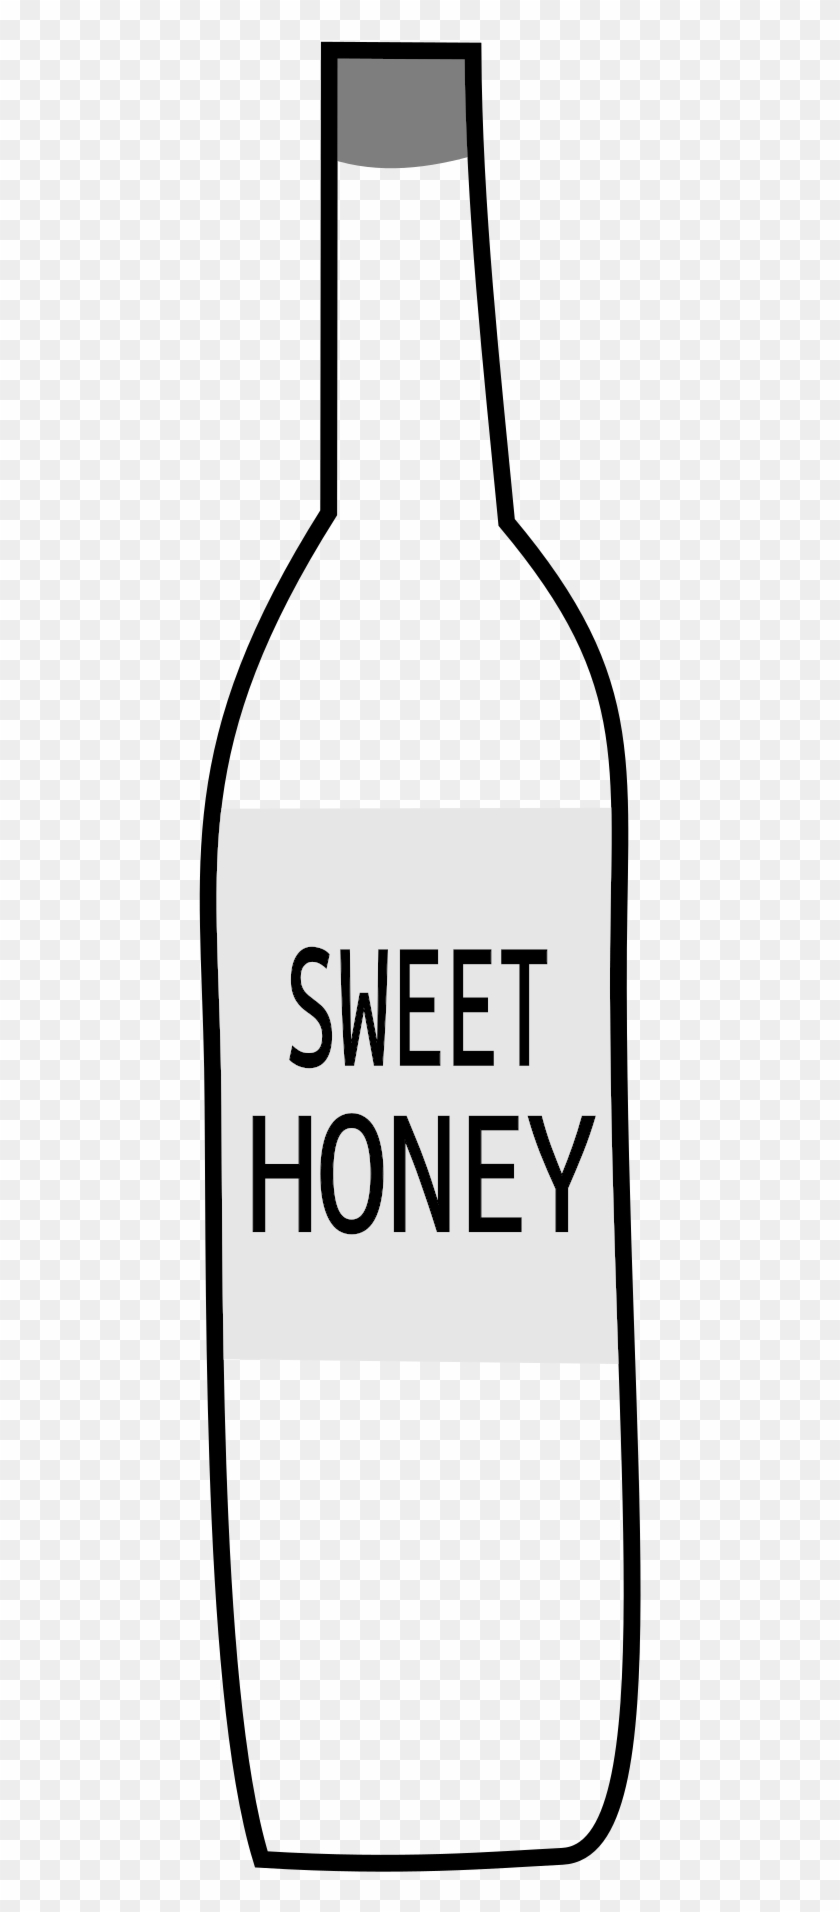 This Free Icons Png Design Of Honey Bottle, Clipart #980916